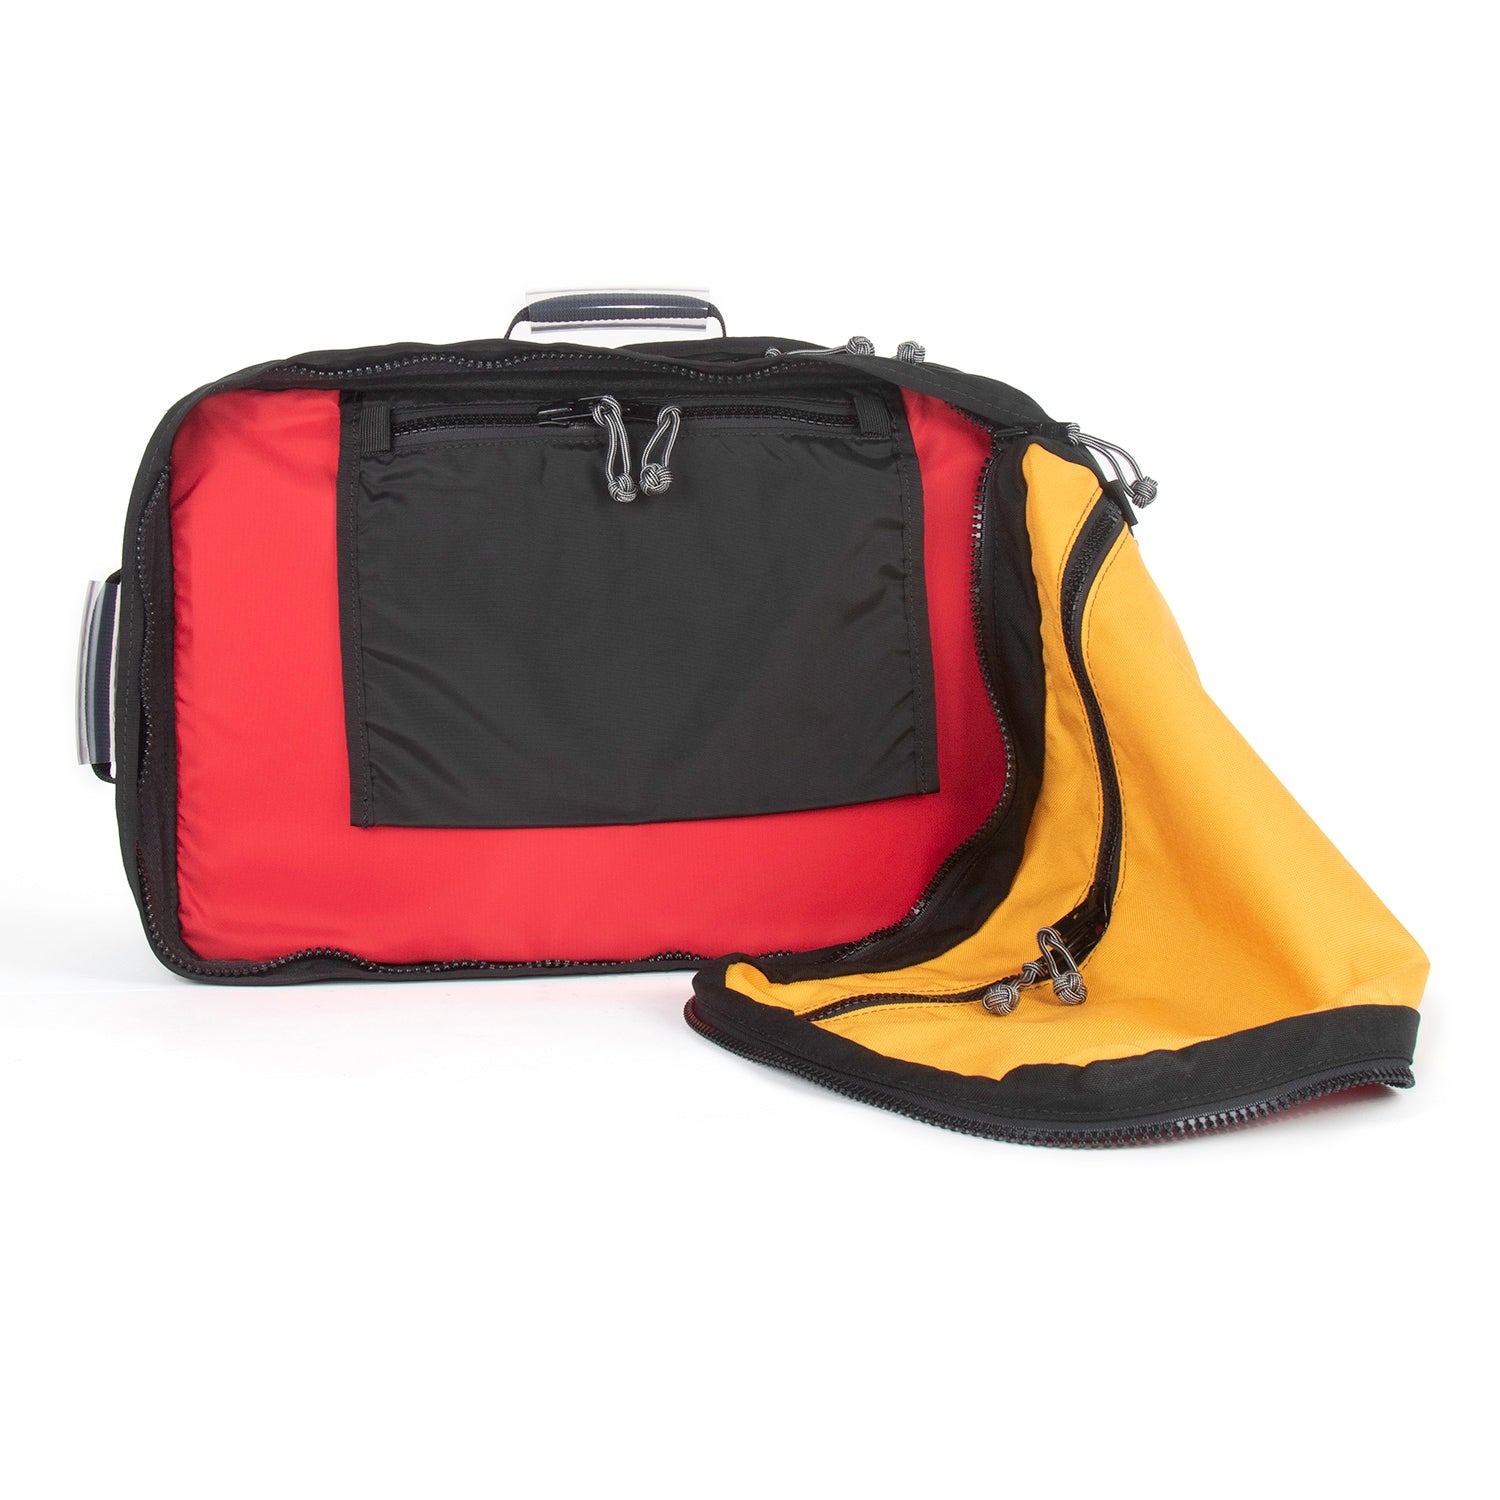 Easy access to outer compartment with toiletries bag. 